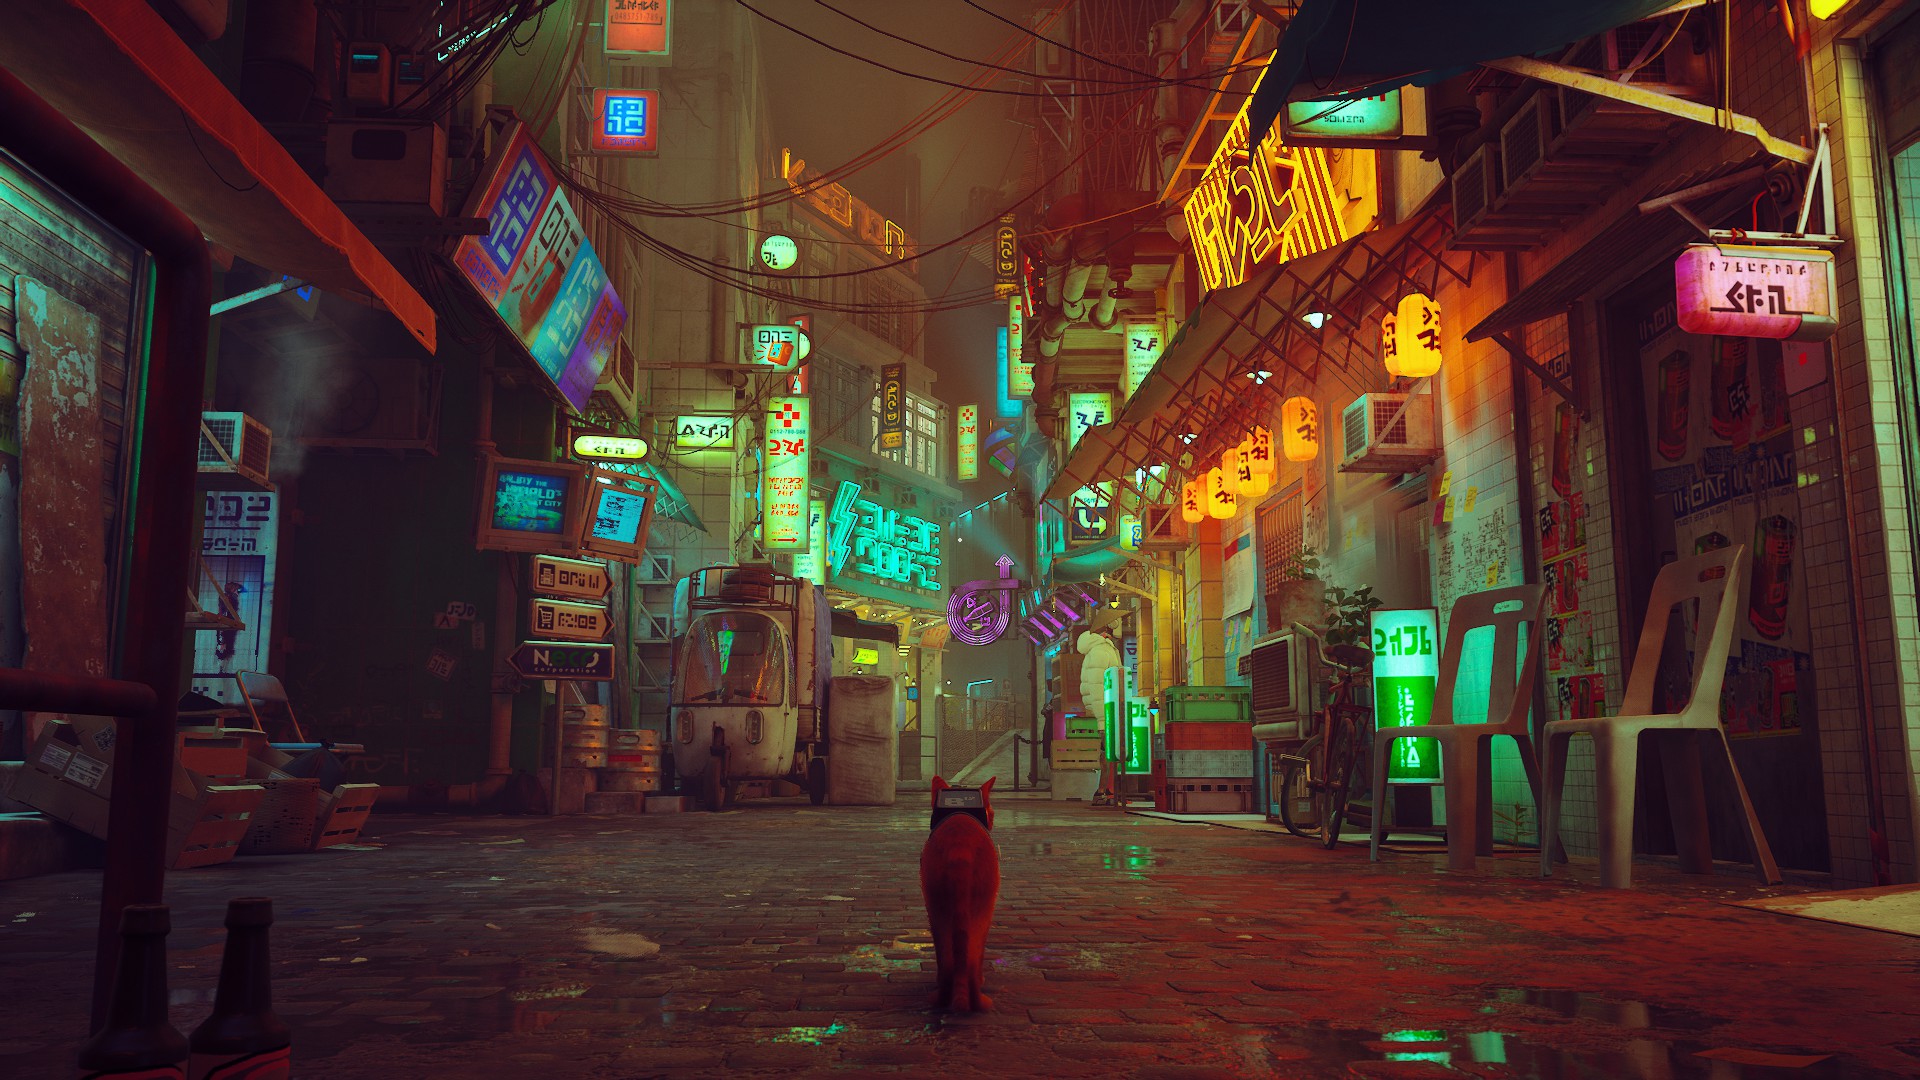 Cat approaching a street full of neon signage.